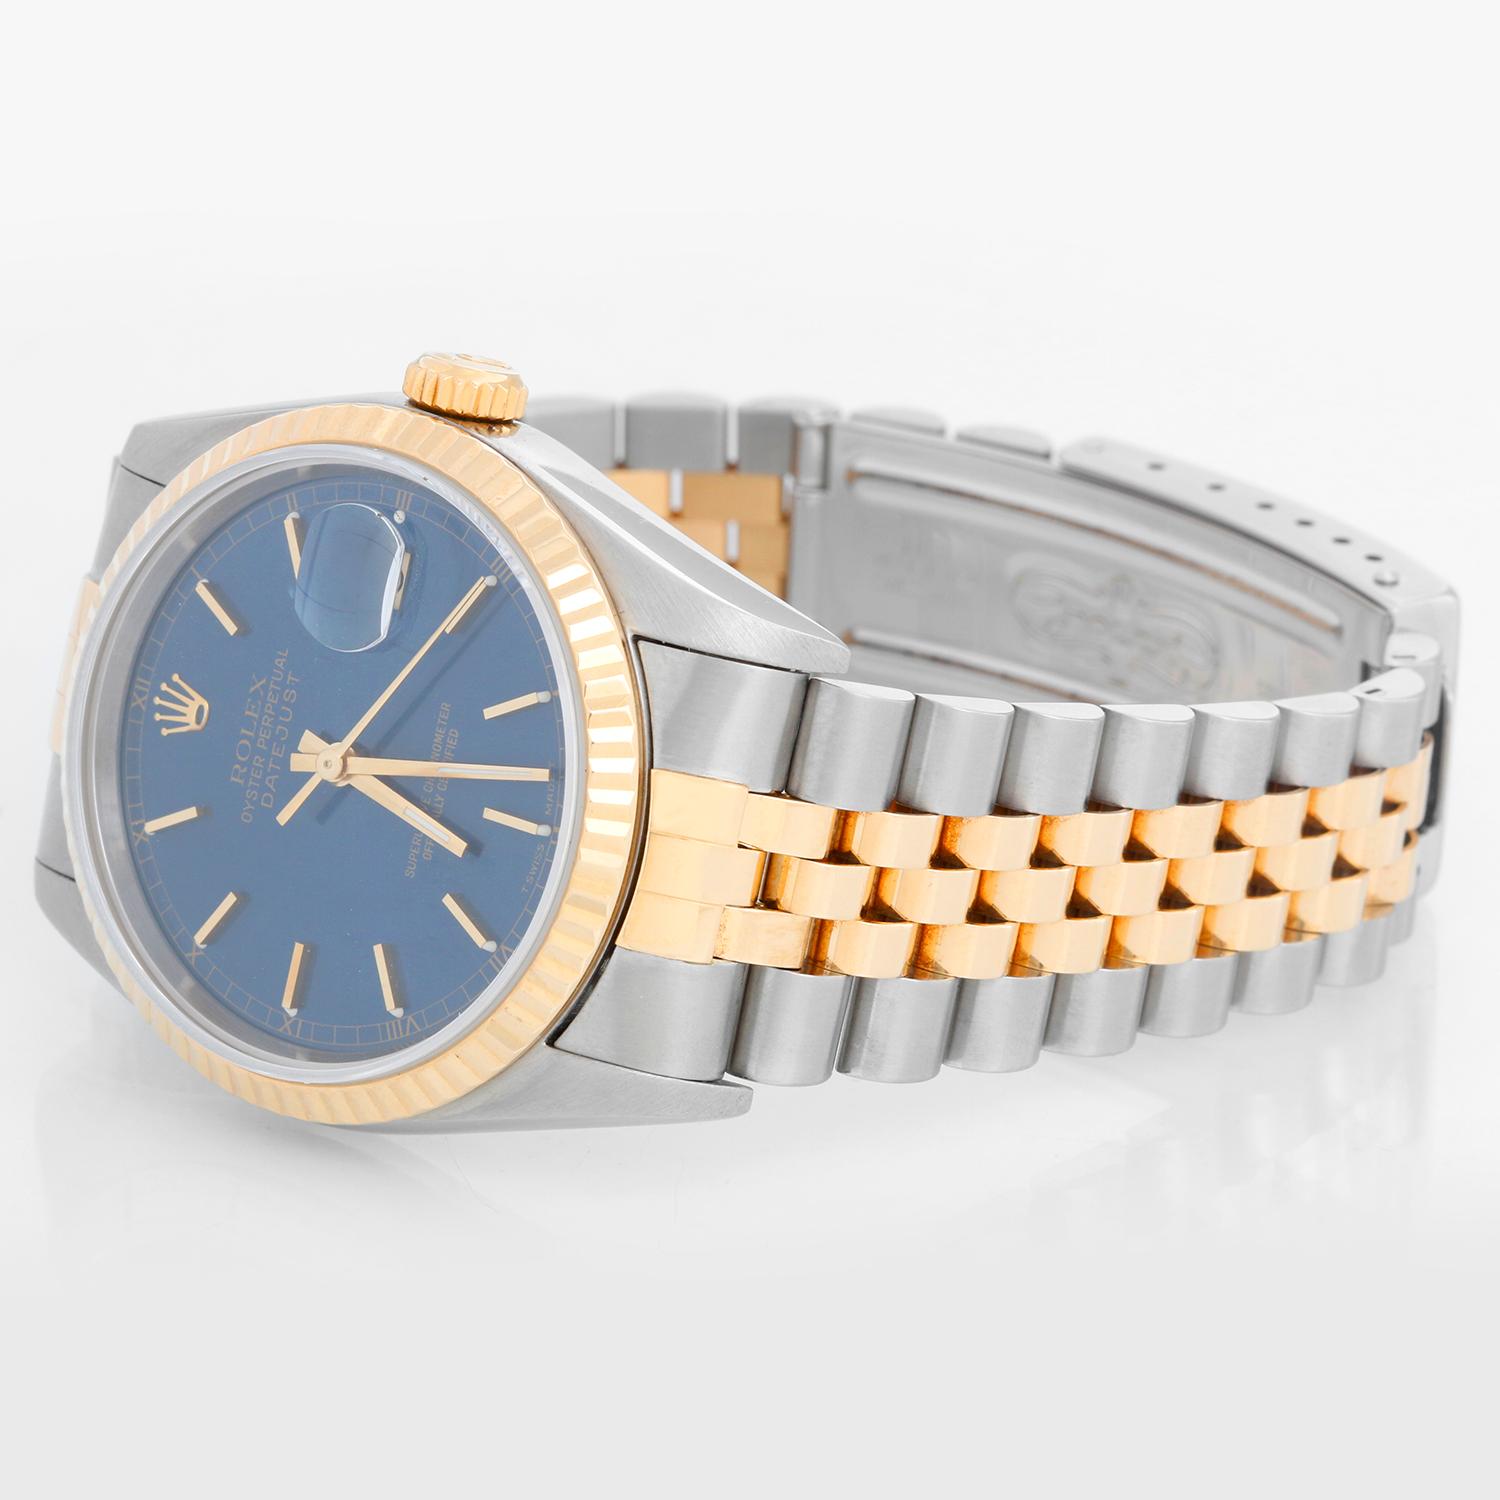 Rolex Datejust 2-Tone Men's Steel & Gold Watch 16233 - Automatic winding, Quickset, sapphire crystal. Stainless steel case with yellow gold bezel (36mm diameter). Blue dial with stick hour markers . Stainless steel and 18k yellow gold Oyster